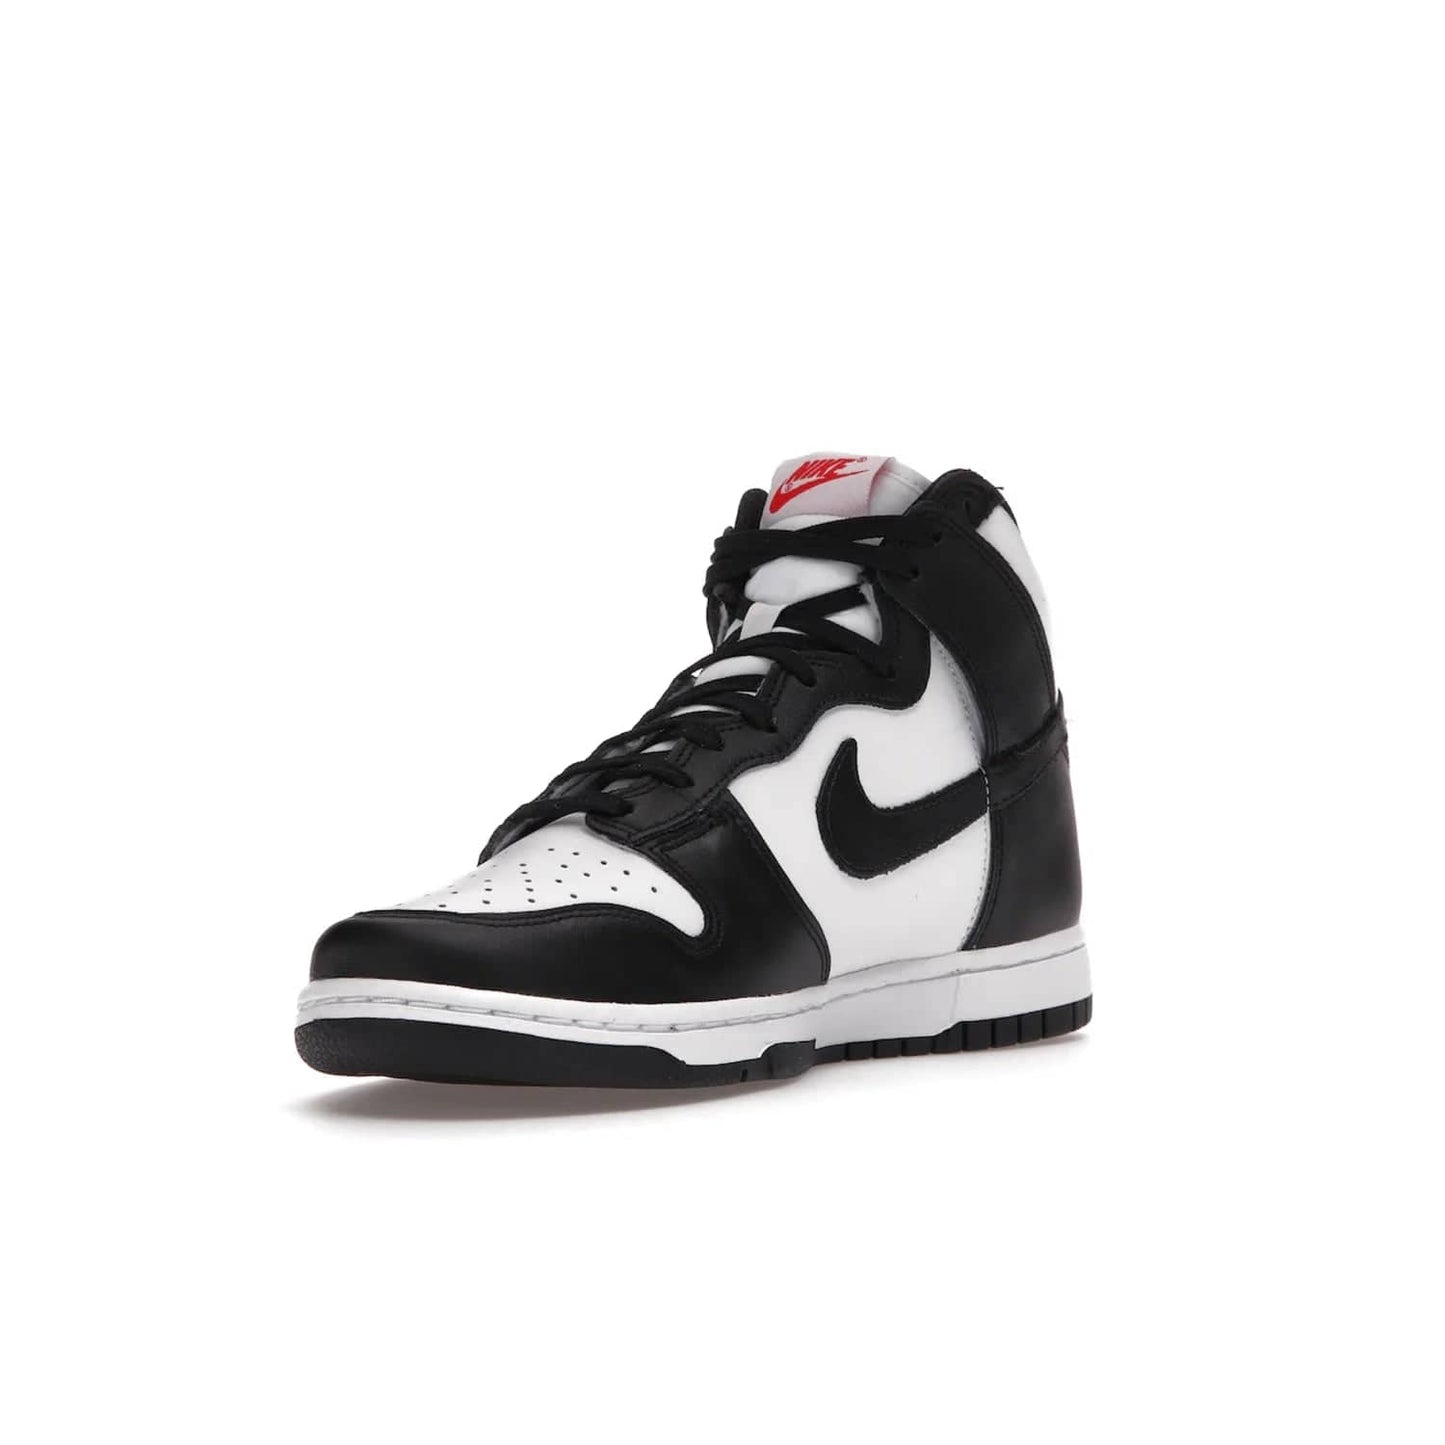 Nike Dunk High Panda (2021) (Women's) - Image 14 - Only at www.BallersClubKickz.com - The Nike Dunk High Panda (2021) (Women's) shoe offers stylish comfort. Featuring black and white leather uppers, a matching sole, with a red woven tongue label, this luxurious shoe will make any outfit stand out. Dare to be different and add to your wardrobe today!